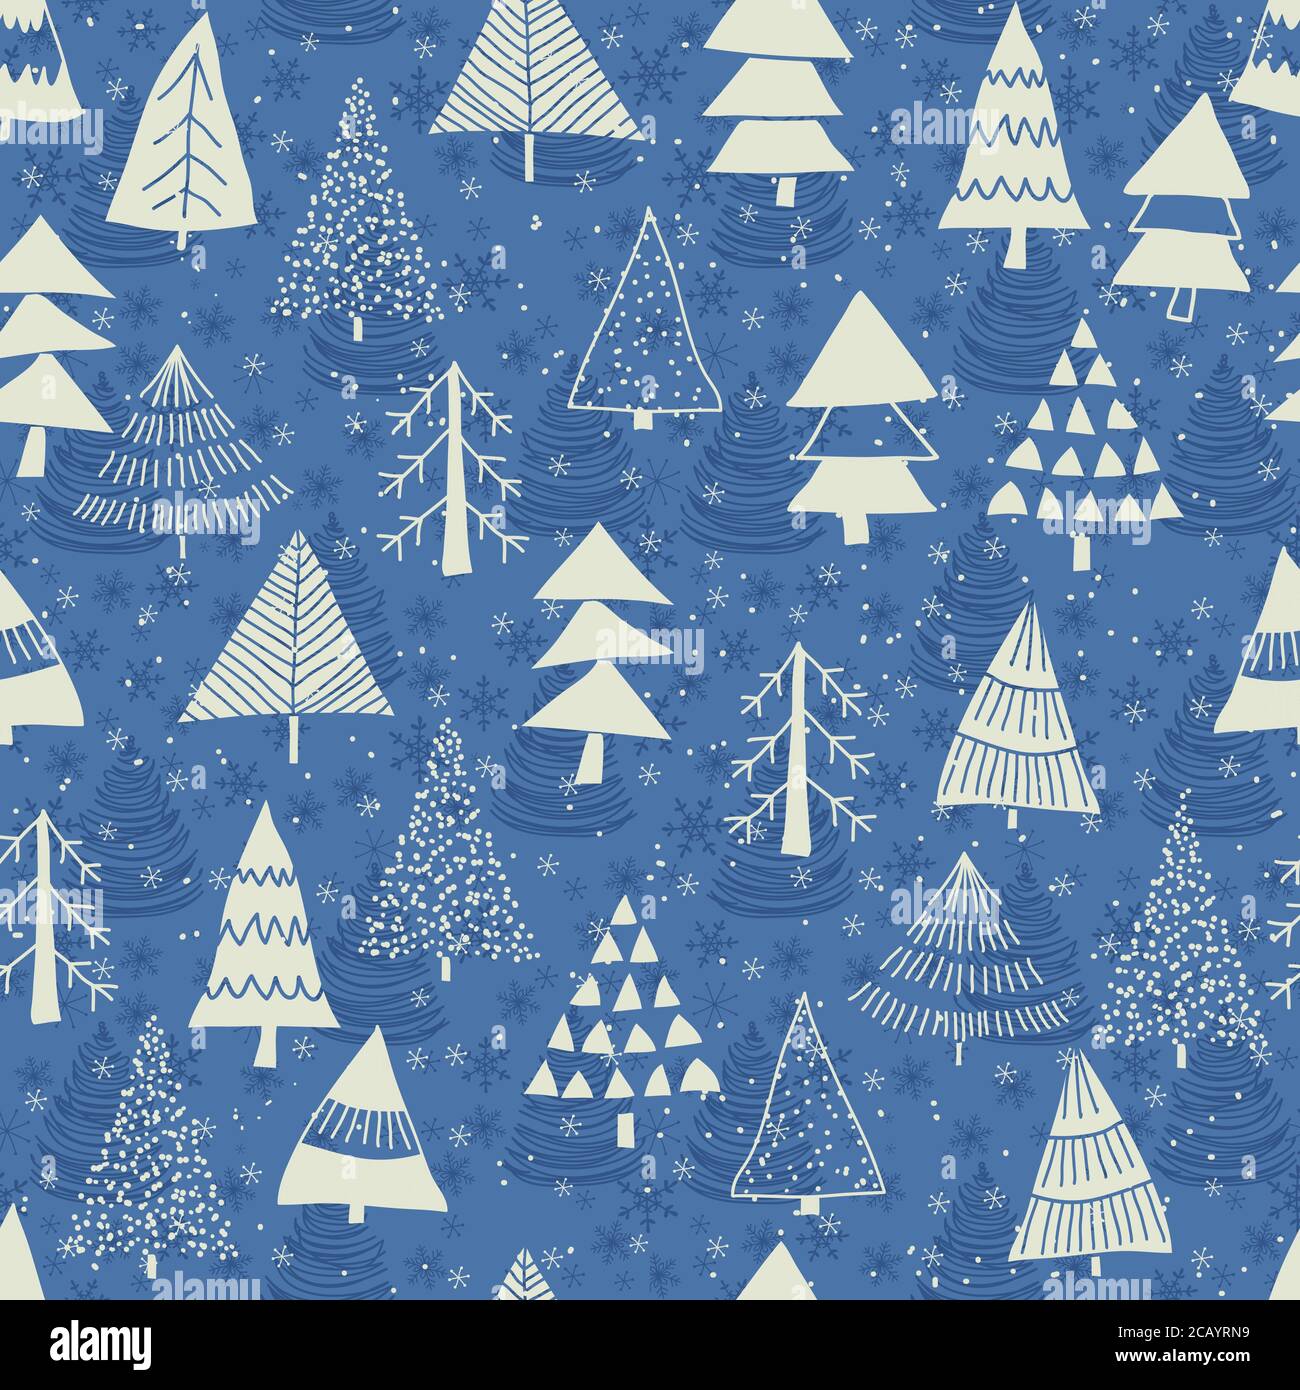 Christmas seamless pattern for greeting cards, wrapping papers. Hand drawn Vector illustration. Stock Vector